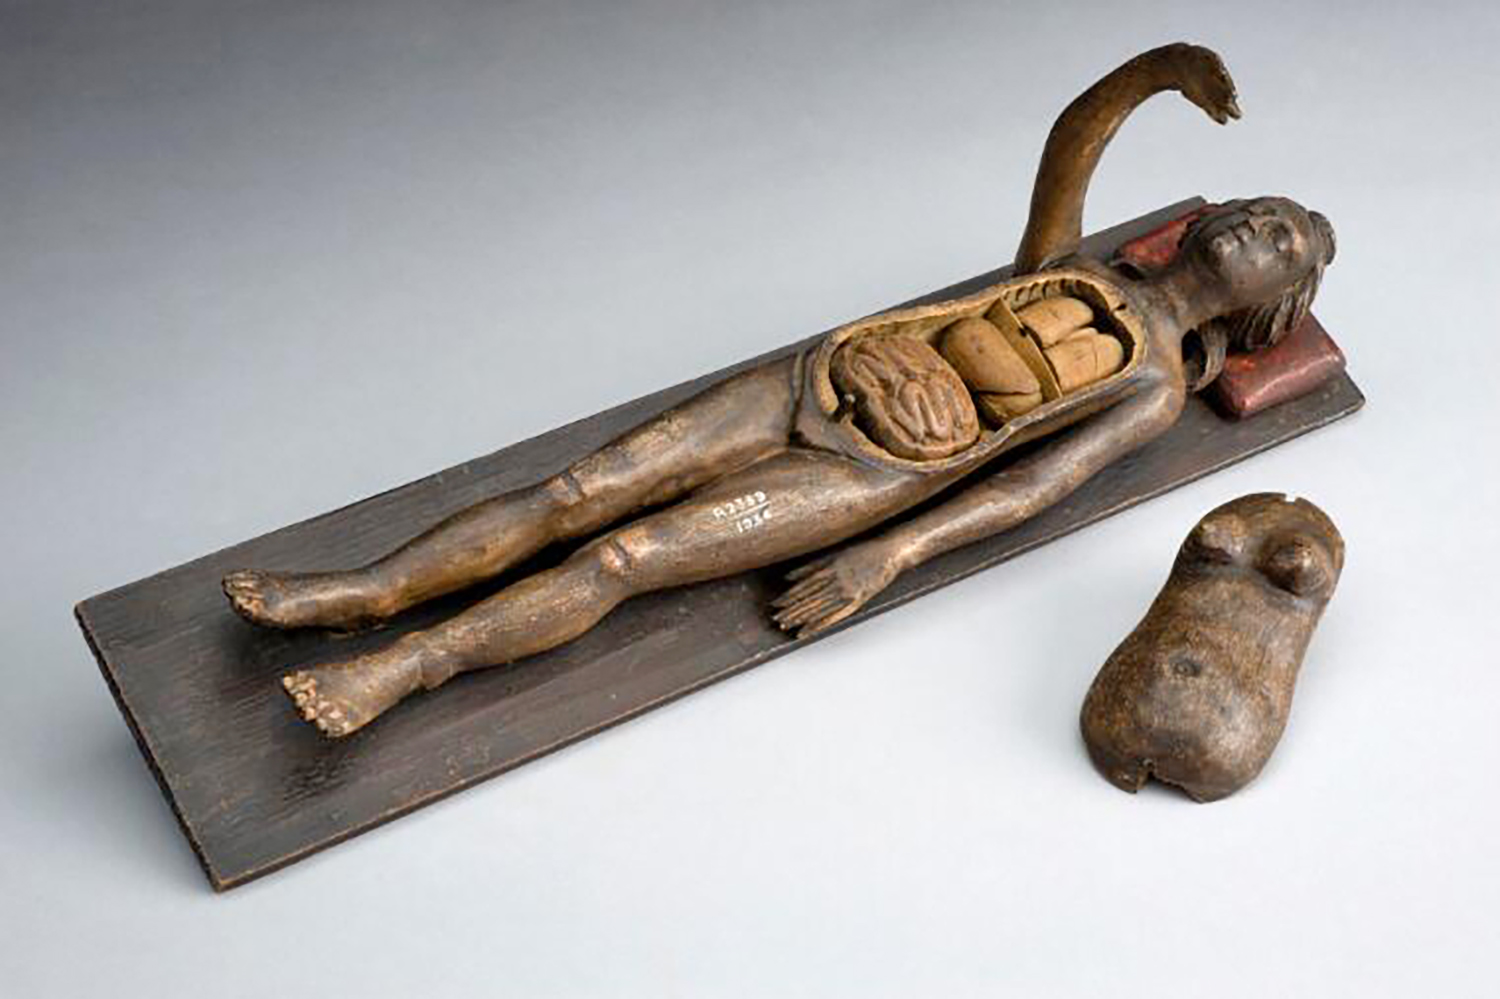 A small, wooden sculpture of a woman’s body lies on a white table. The wooden figure has one arm raised and one arm lying by its side. Beside the figure is a piece of the upper body that has been removed to show the figure’s organs.